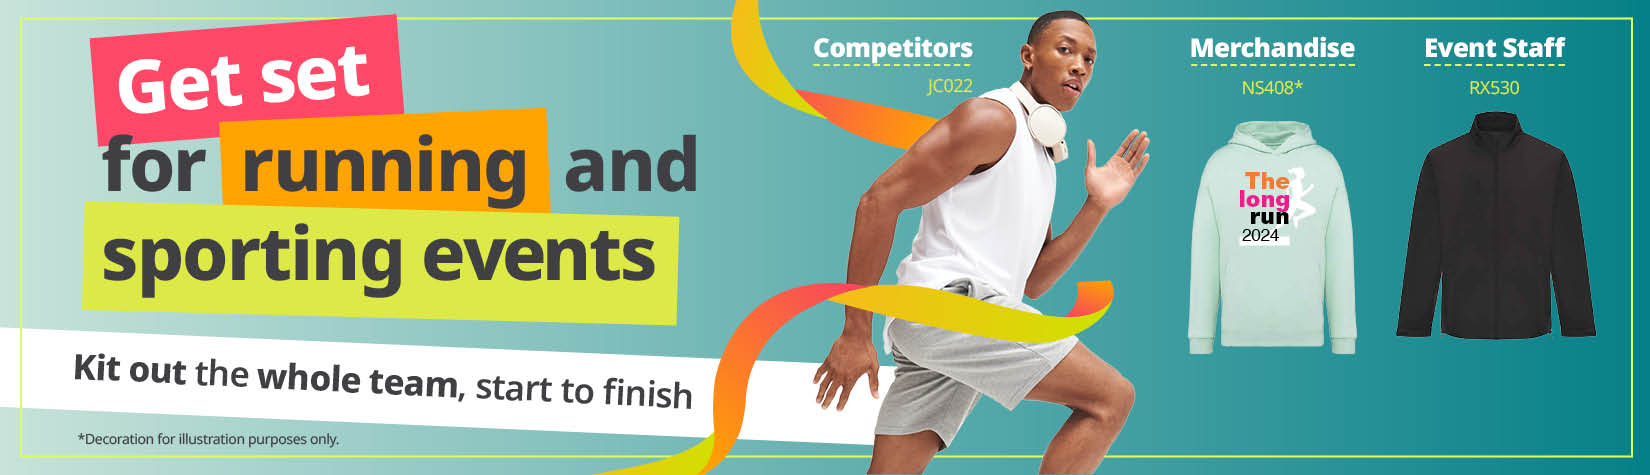 Get set for running & sporting events